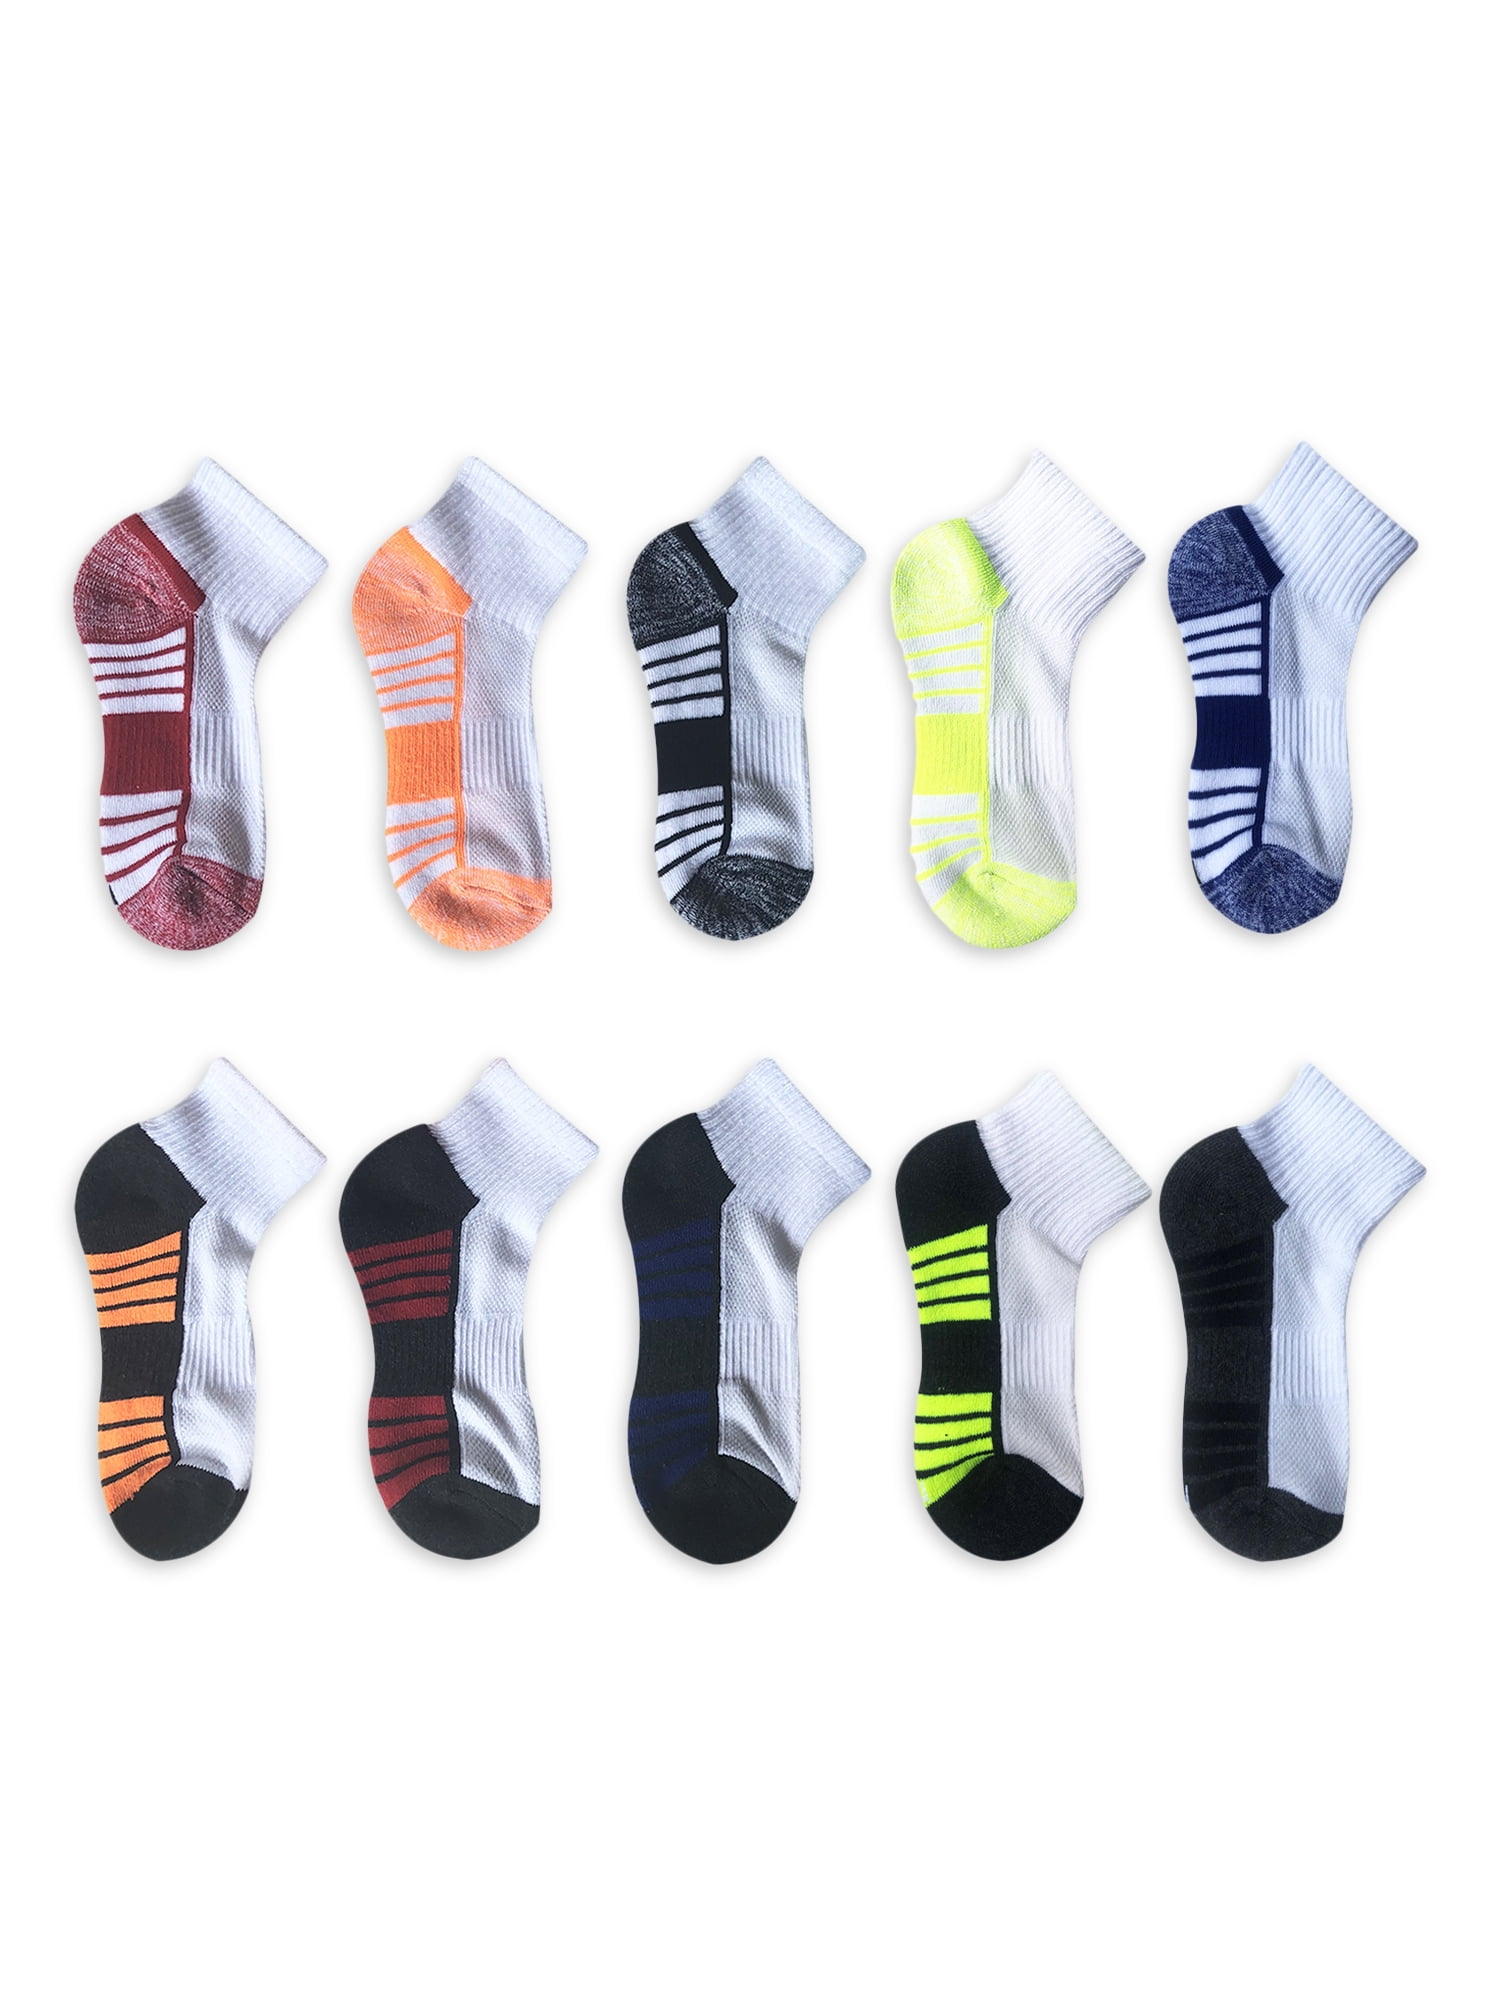 Boys 3 pack Crew Athletic Socks Large Shoe Size 3-9 Assorted Colors New 